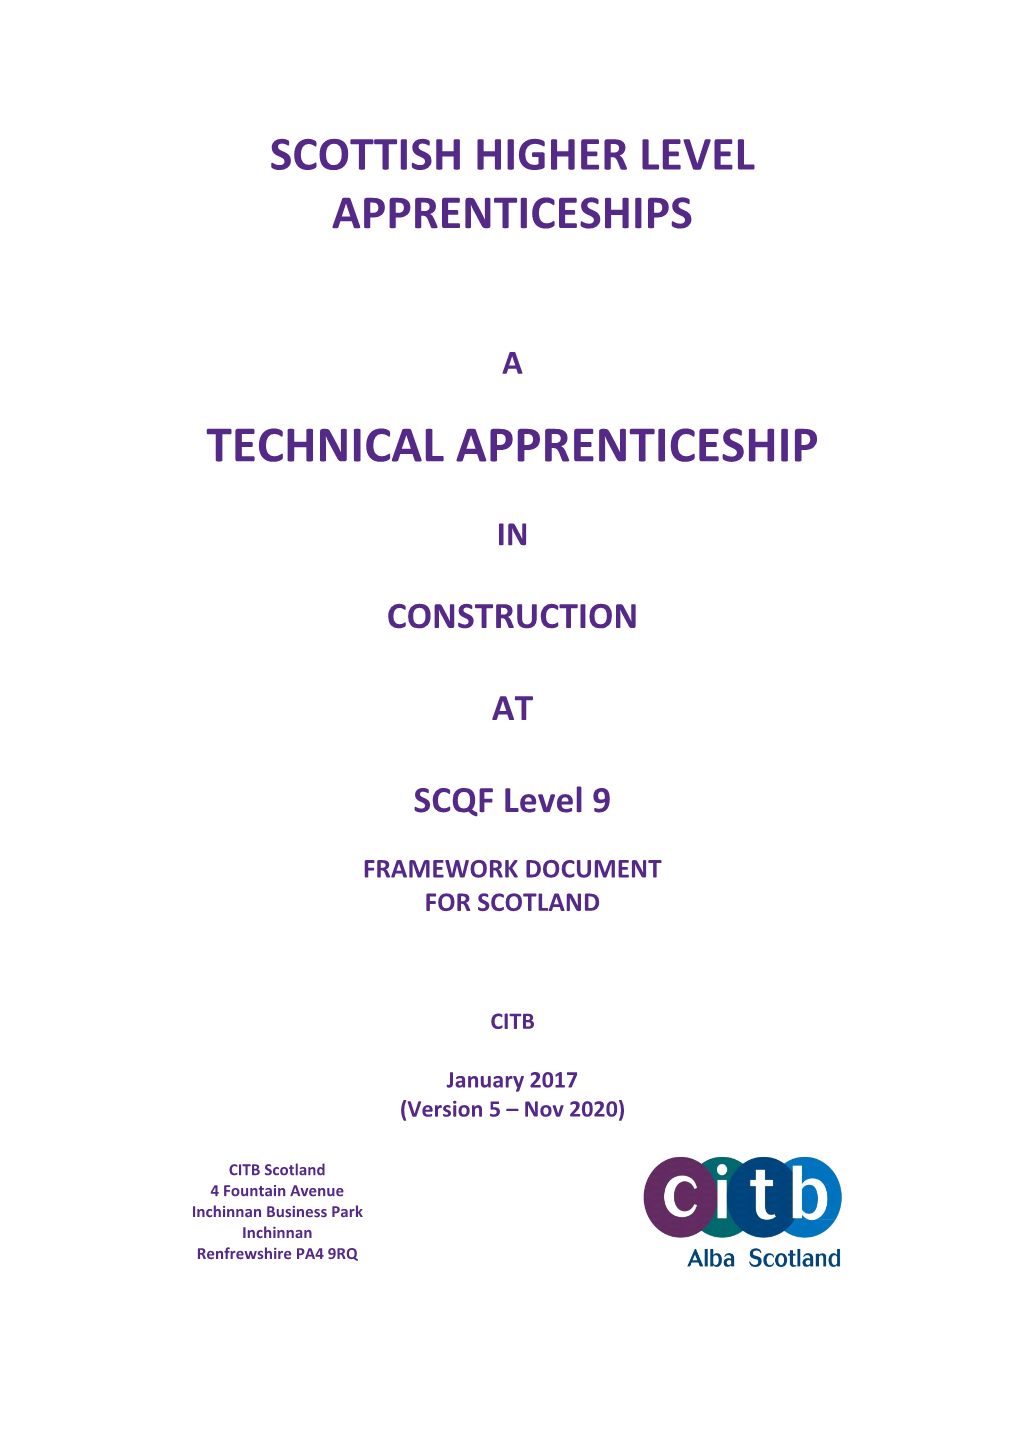 Technical Apprenticeship in Construction at SCQF Level 9